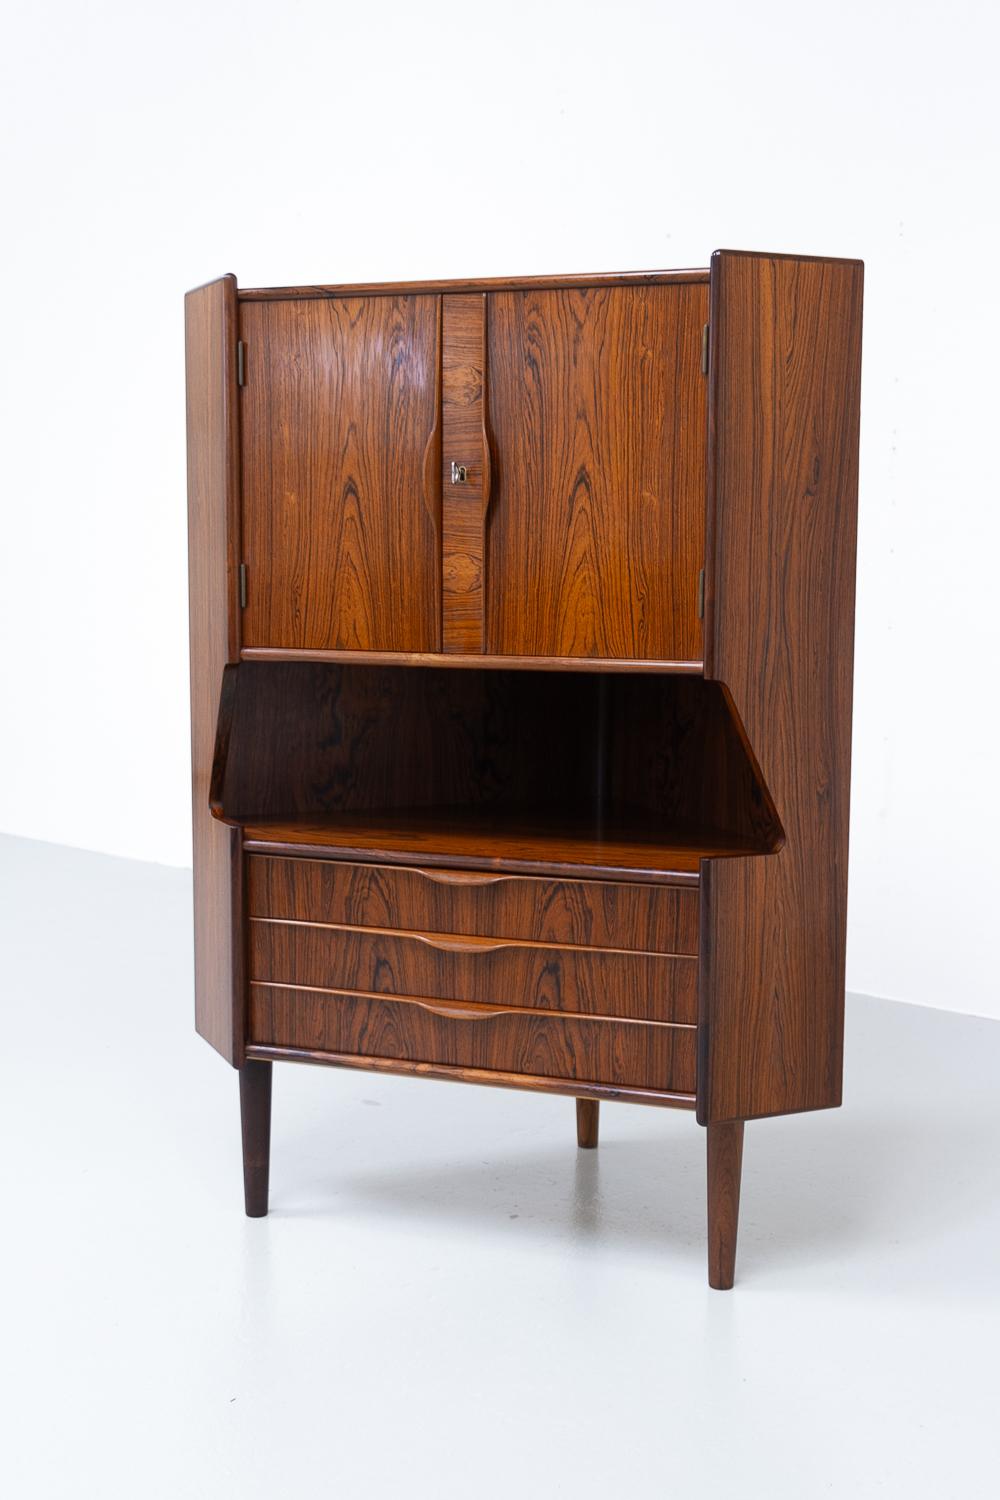 Mid-20th Century Vintage Danish Rosewood Corner Cabinet with Dry Bar, 1960s.